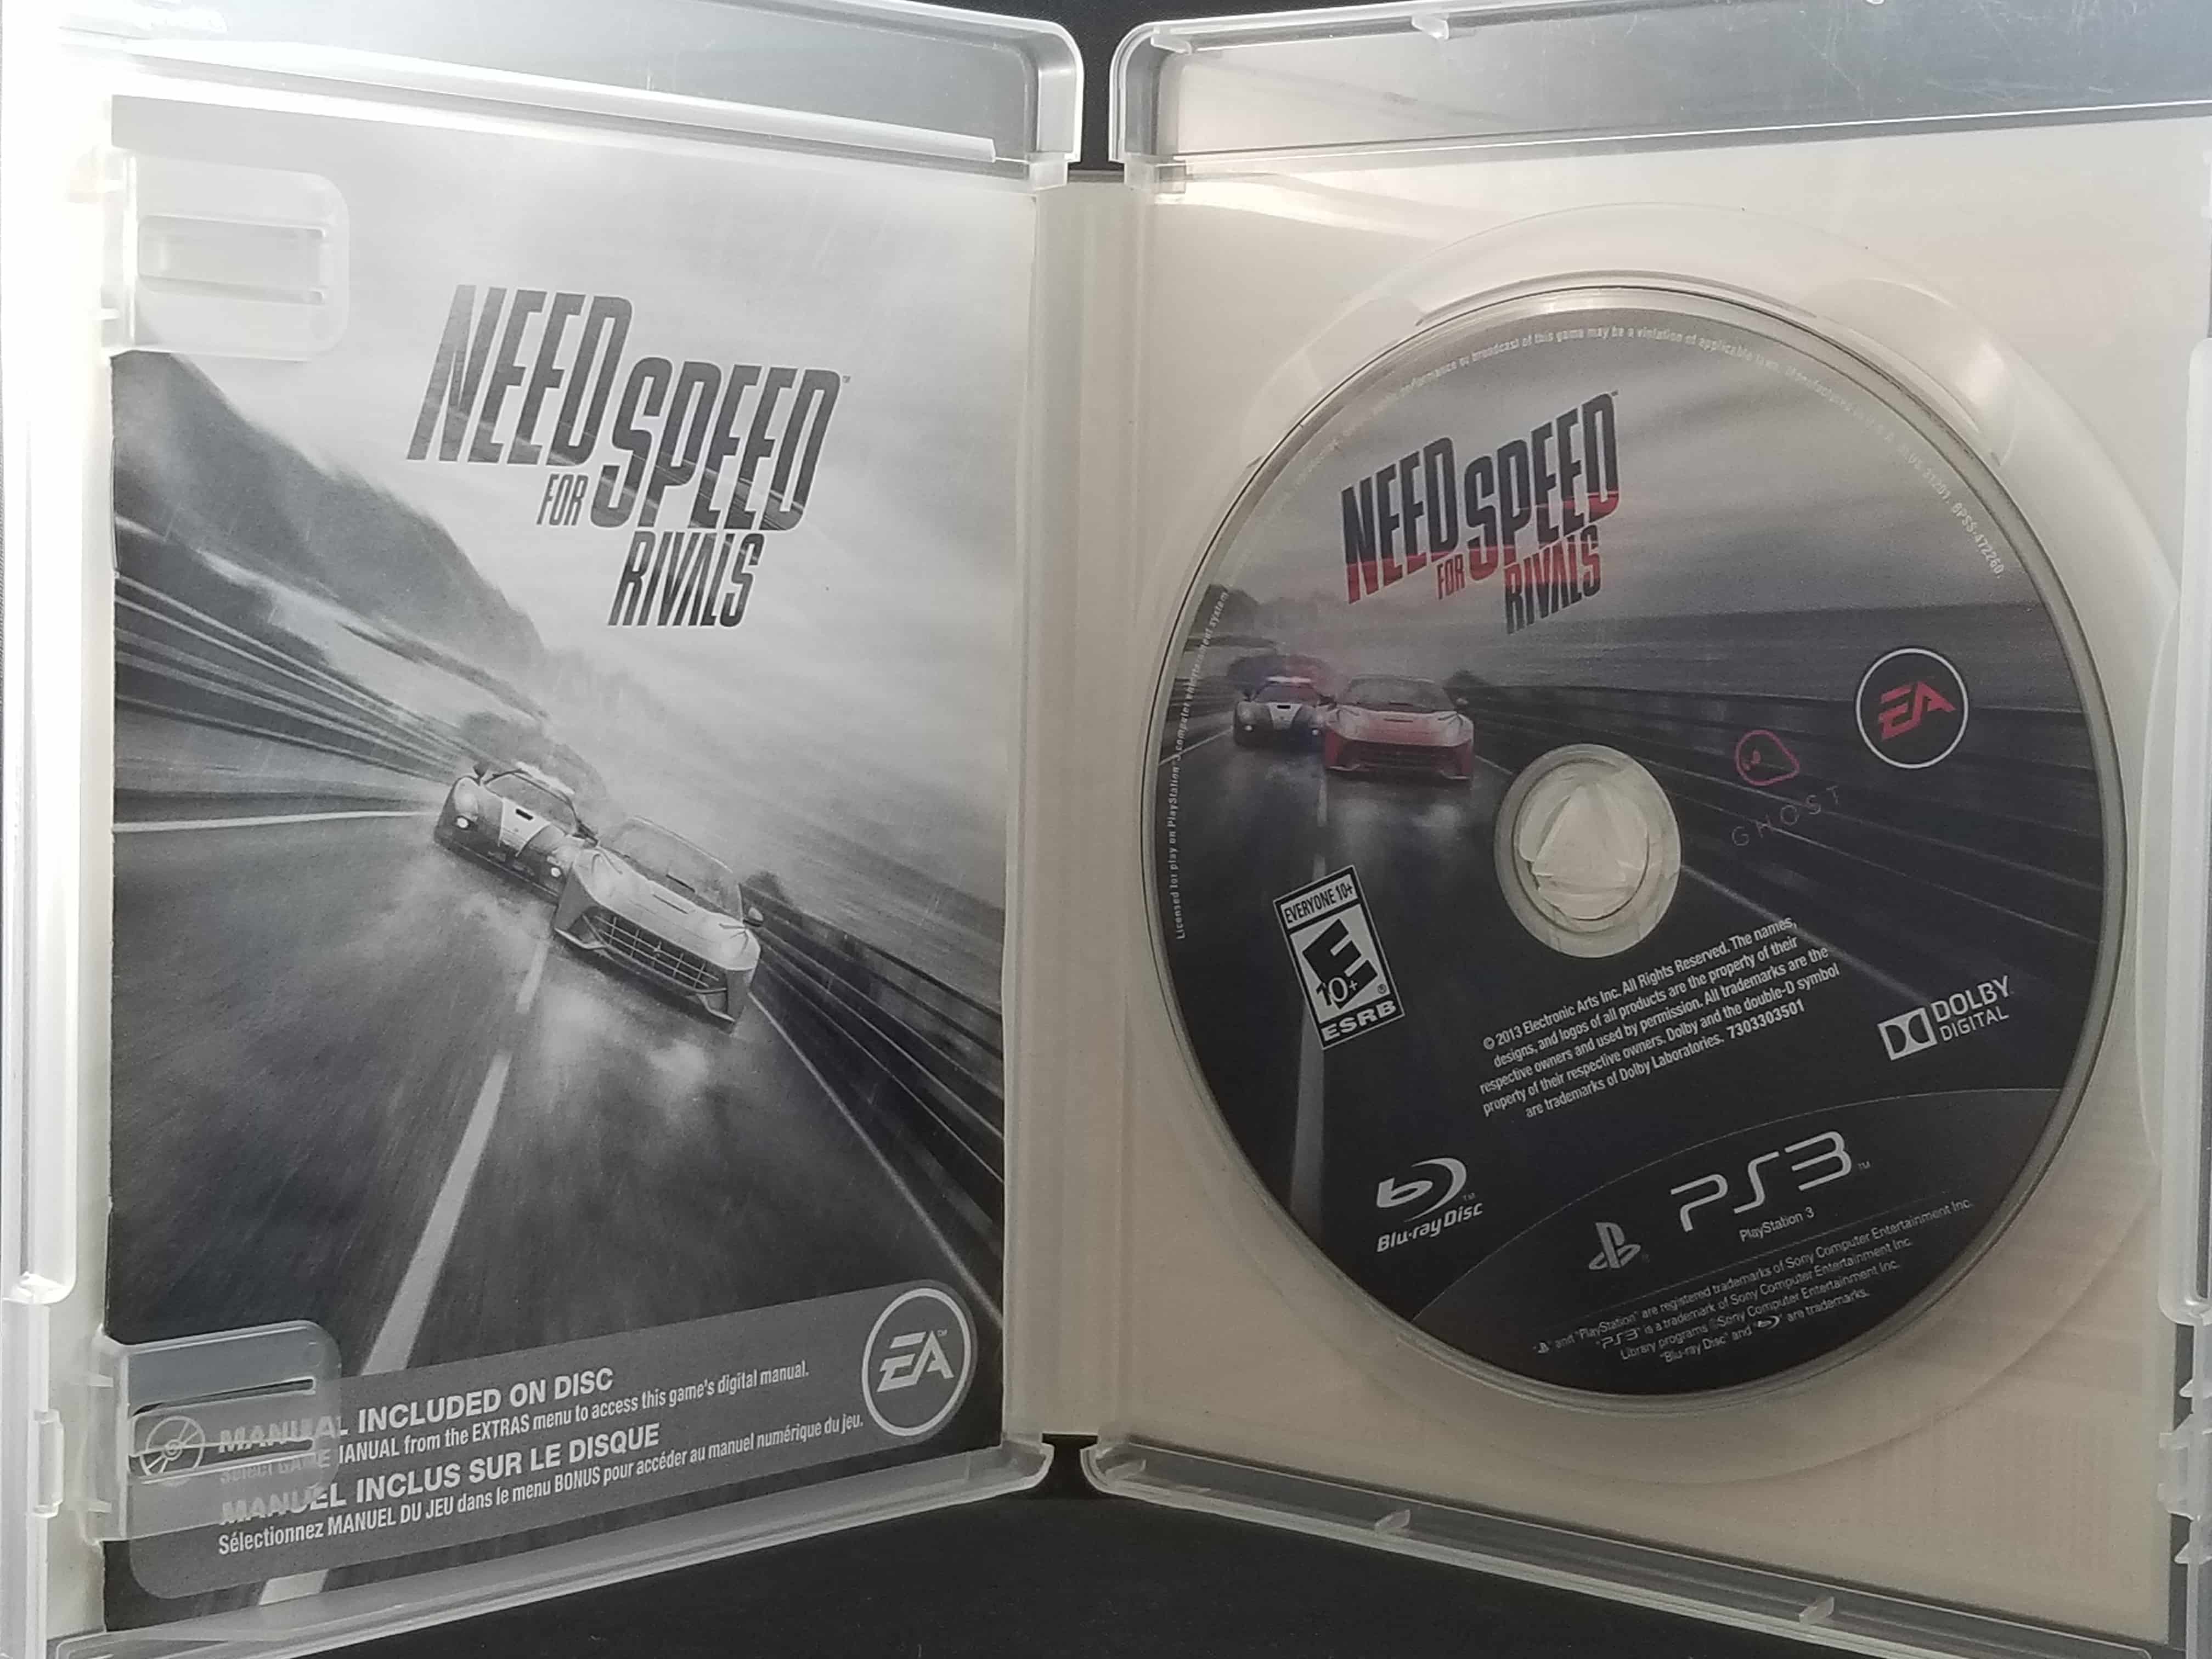 Sony Need for Speed Rivals Games